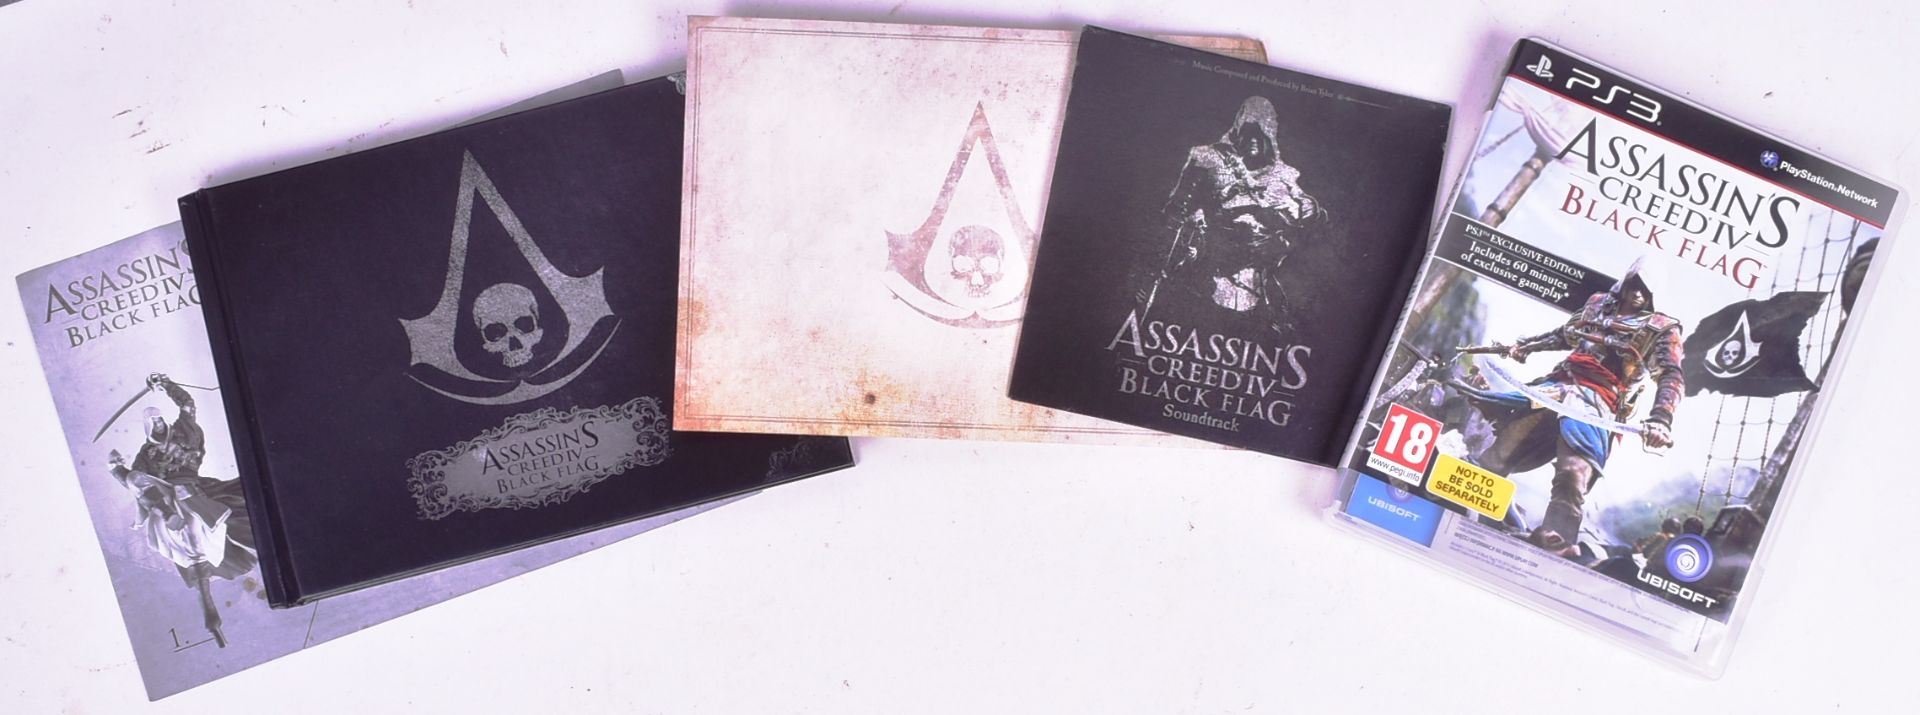 RETRO GAMING - PS3 ASSASSINS CREED BLACK FLAG BUCCANEER EDITION - Image 5 of 6